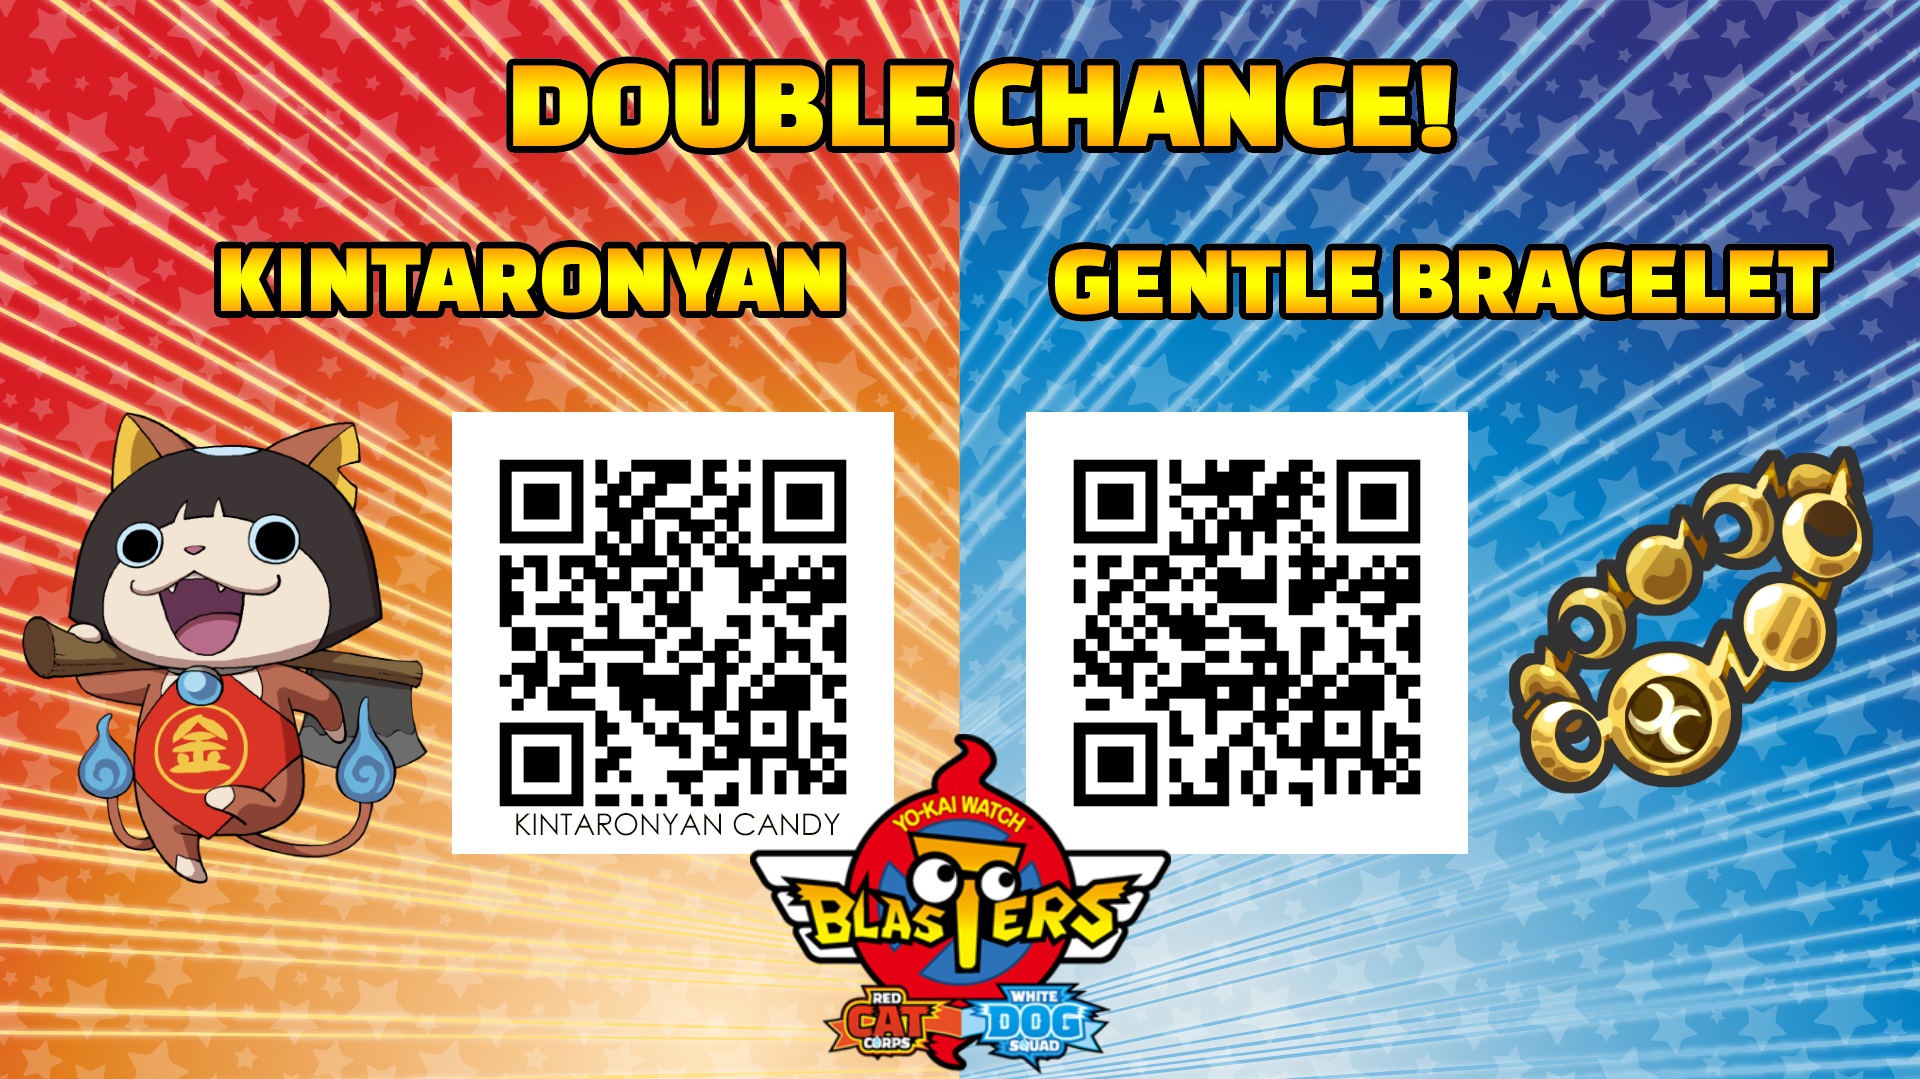 The first QR Code allows you to get the Kintaronyan Candy (to befriend Kint...